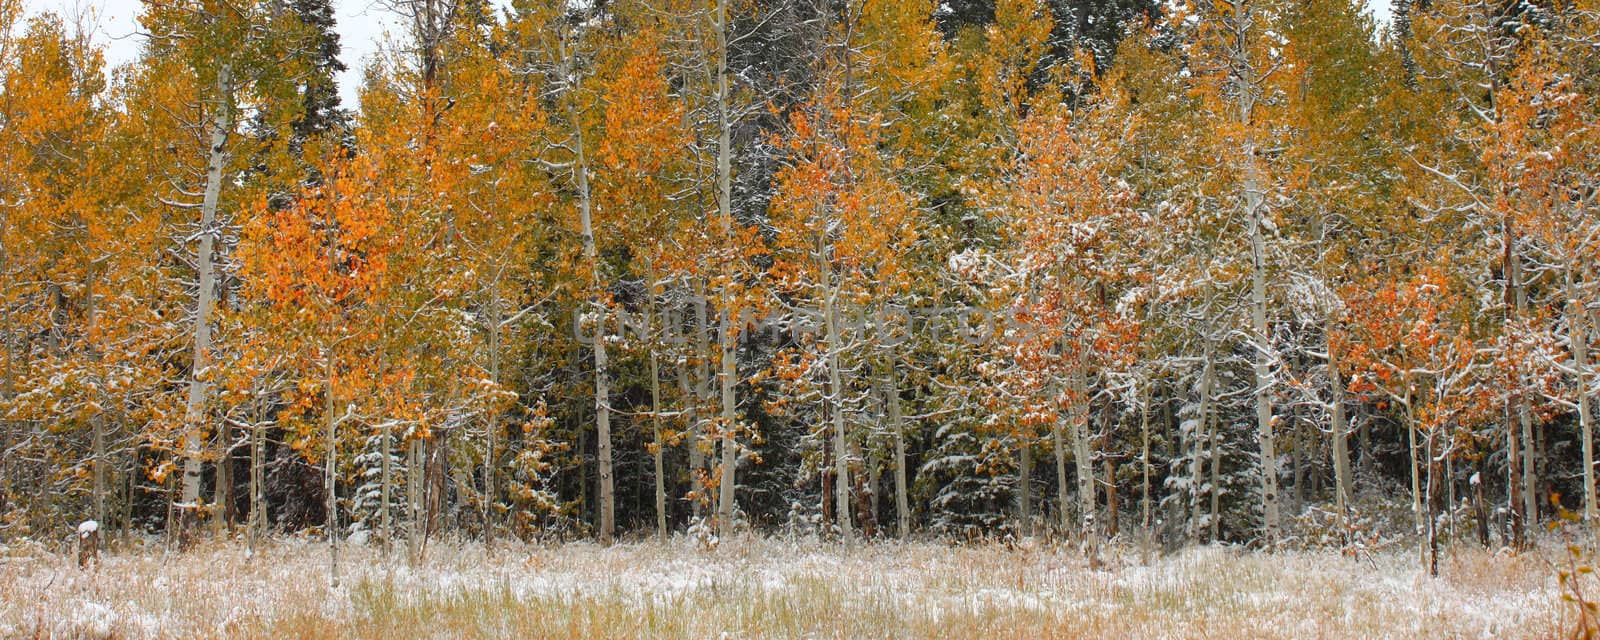 Snowy autumn scenery in the Cache National Forest of Utah.